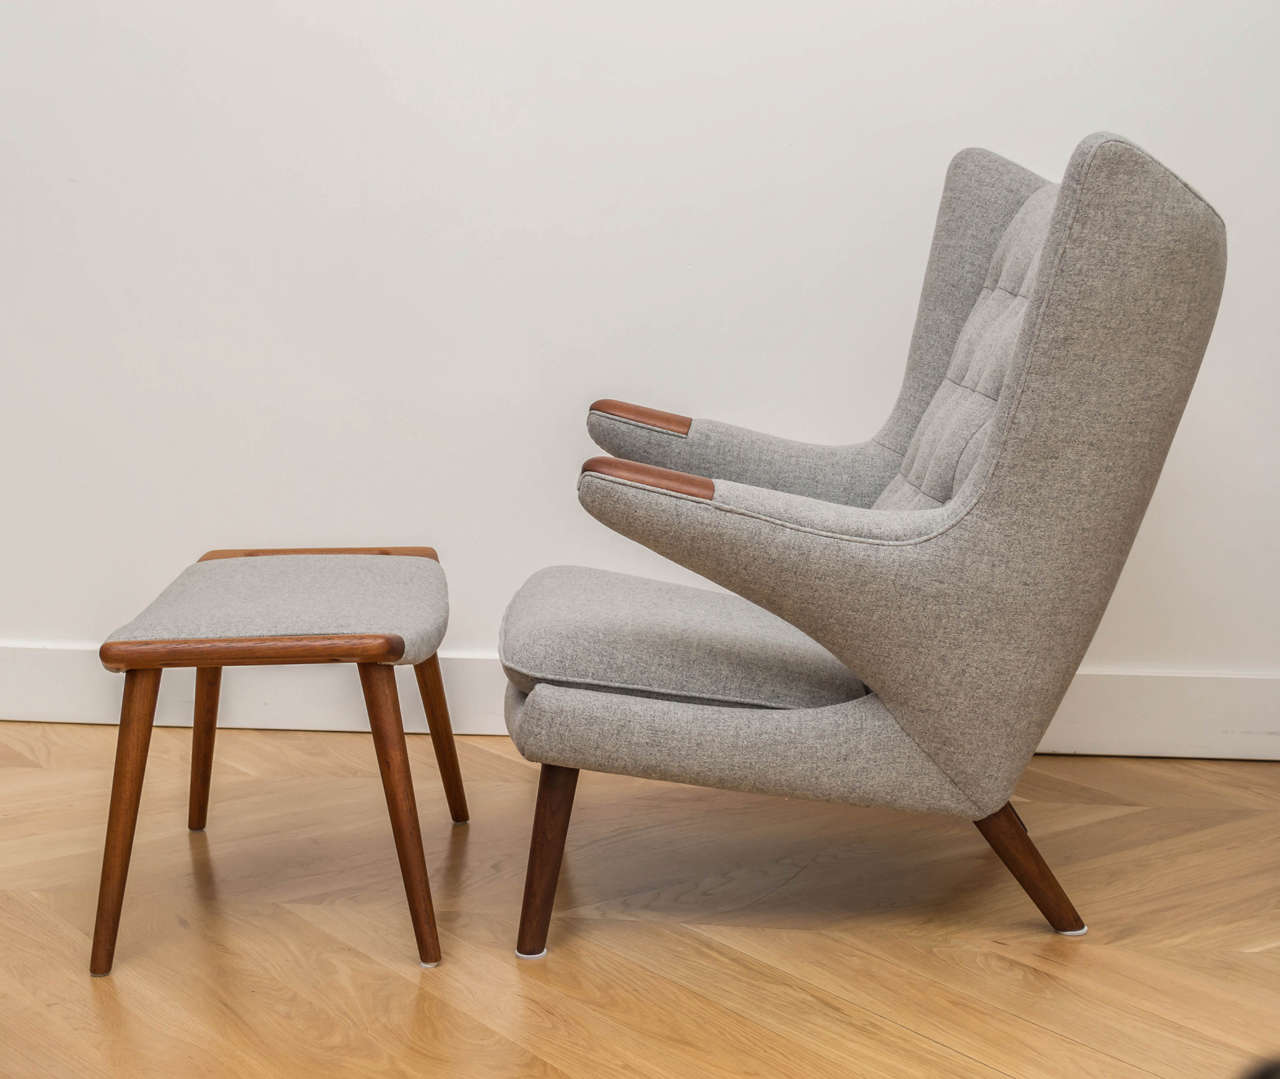 Great example of the Hans Wegner Papa Bear chair and ottoman.
All refinished and newly reupholstered in a Maharam wool.